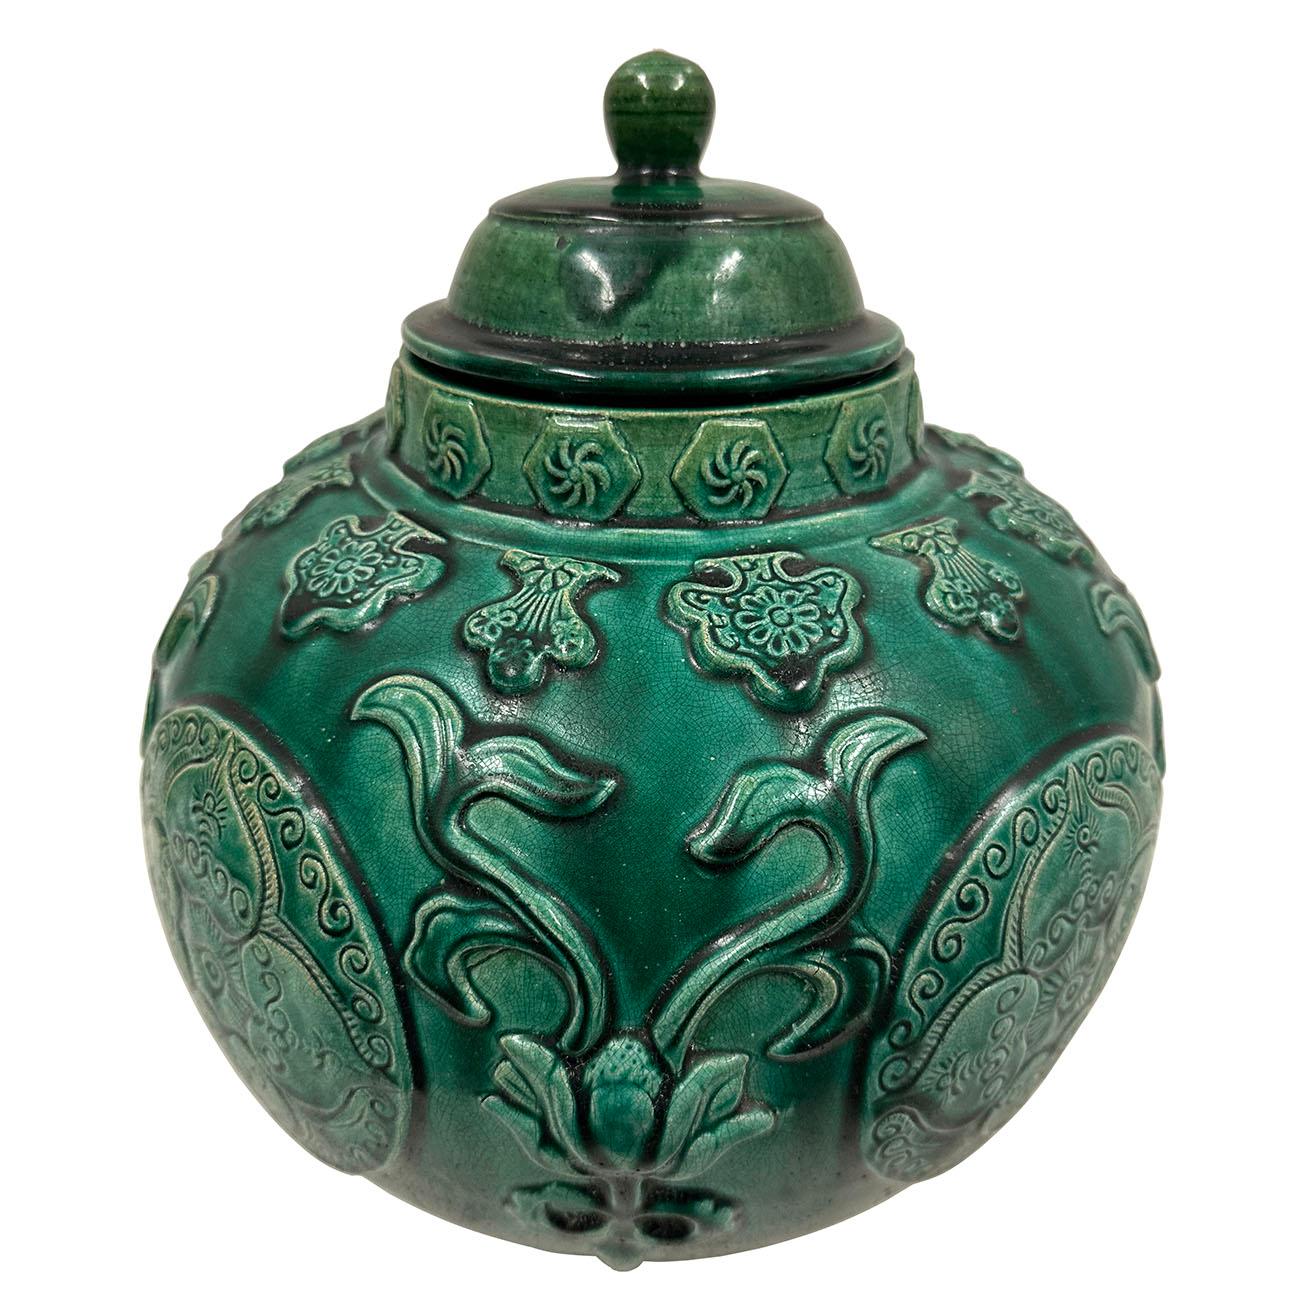 

With detailed raised hand carved Feng Shui Pattern all over, this peacock green glazed ceramic jar is very unique. It is a perfect decorative element in any house. The pictures says everything. The patina and age wear shows it's history.

Size: